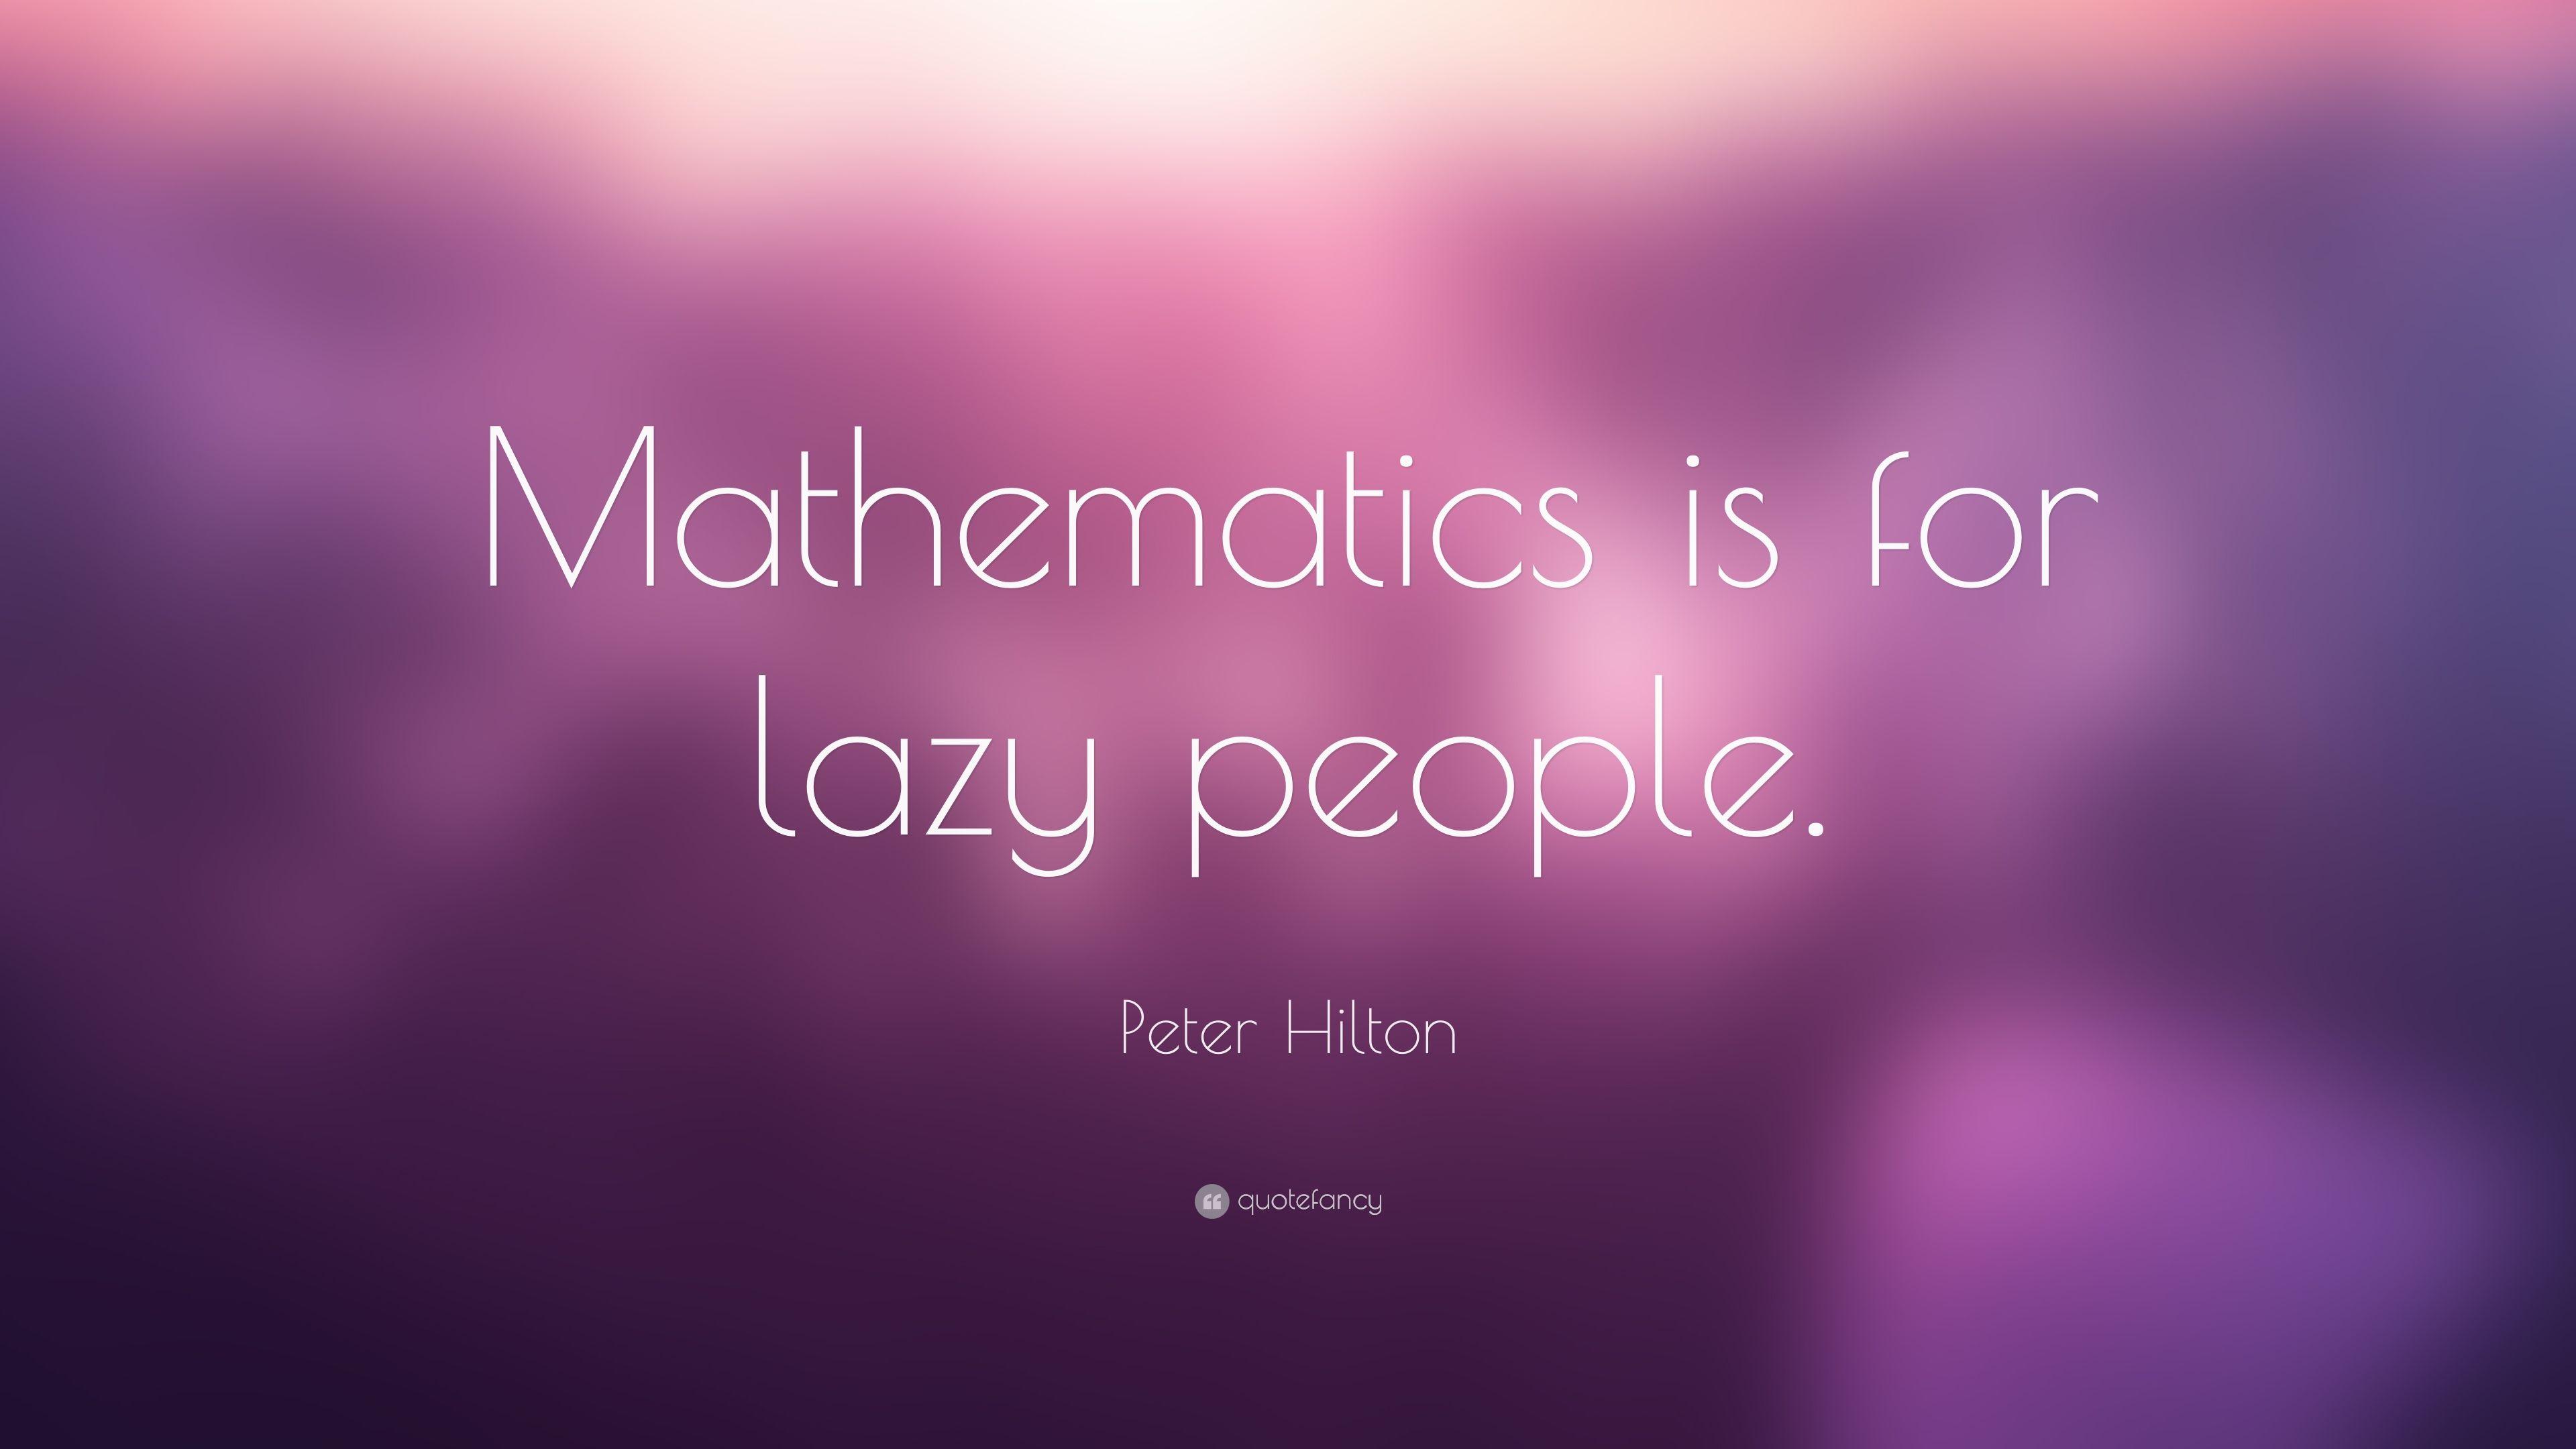 Peter Hilton Quote: “Mathematics is for lazy people.” 12 wallpaper